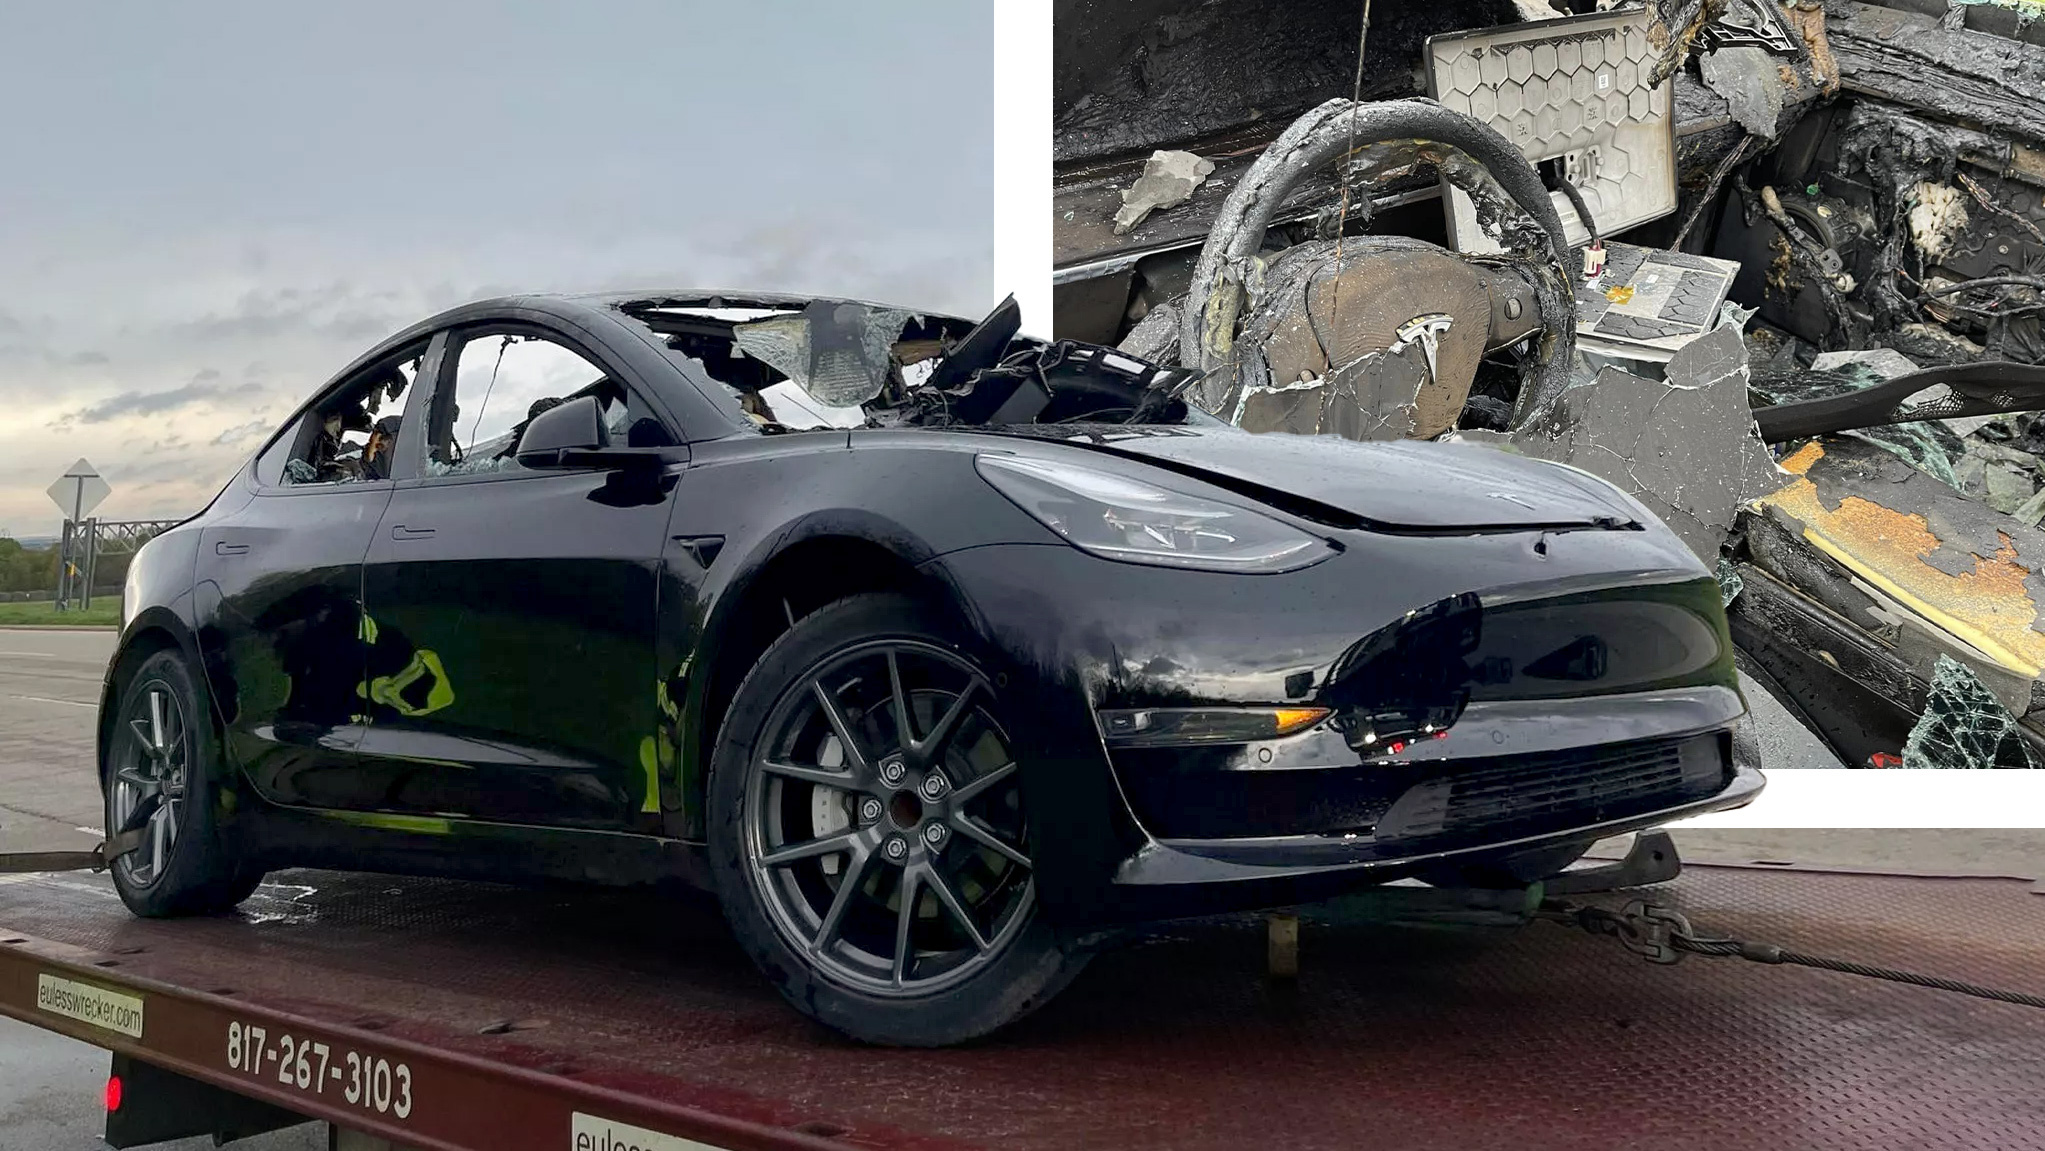 Tesla Model 3 Bursts Into Flames From Inside While Driving On The Road